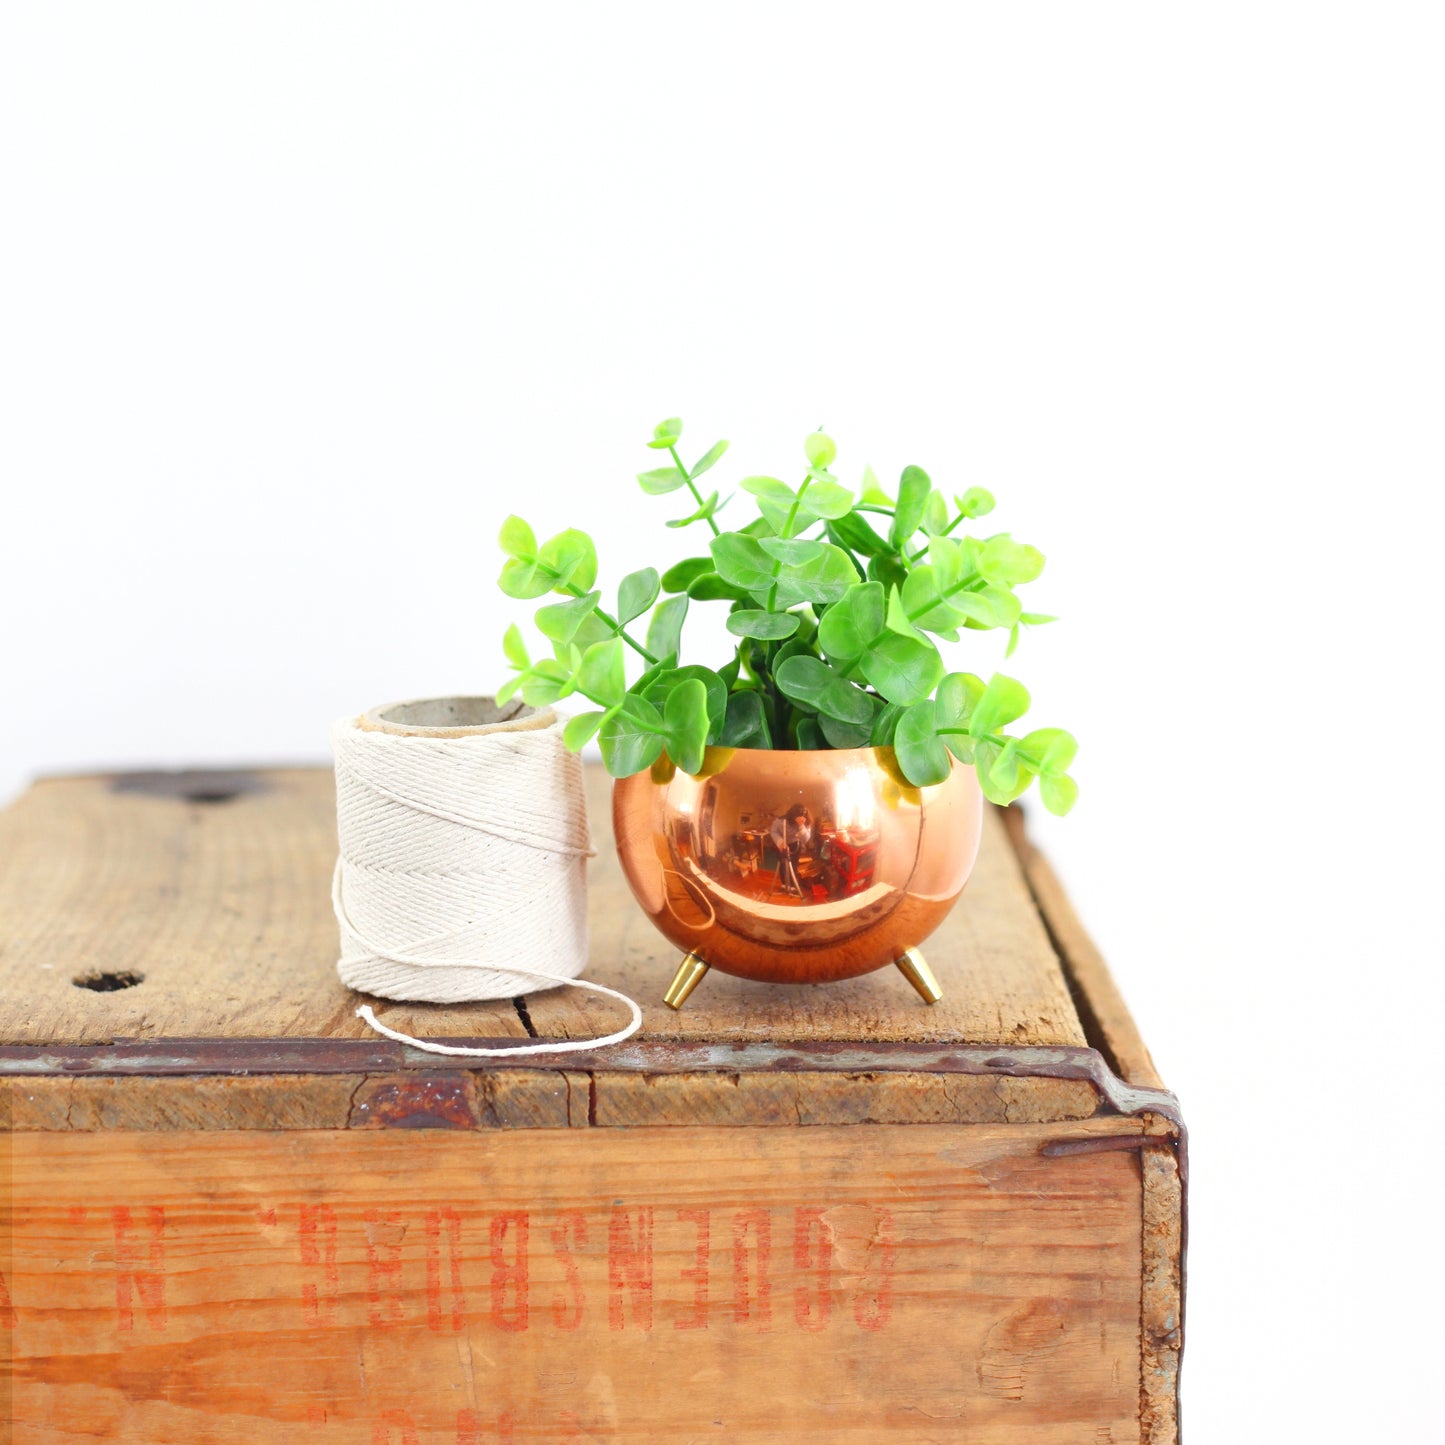 SOLD - Vintage Copper Footed Planter by Coppercraft Guild